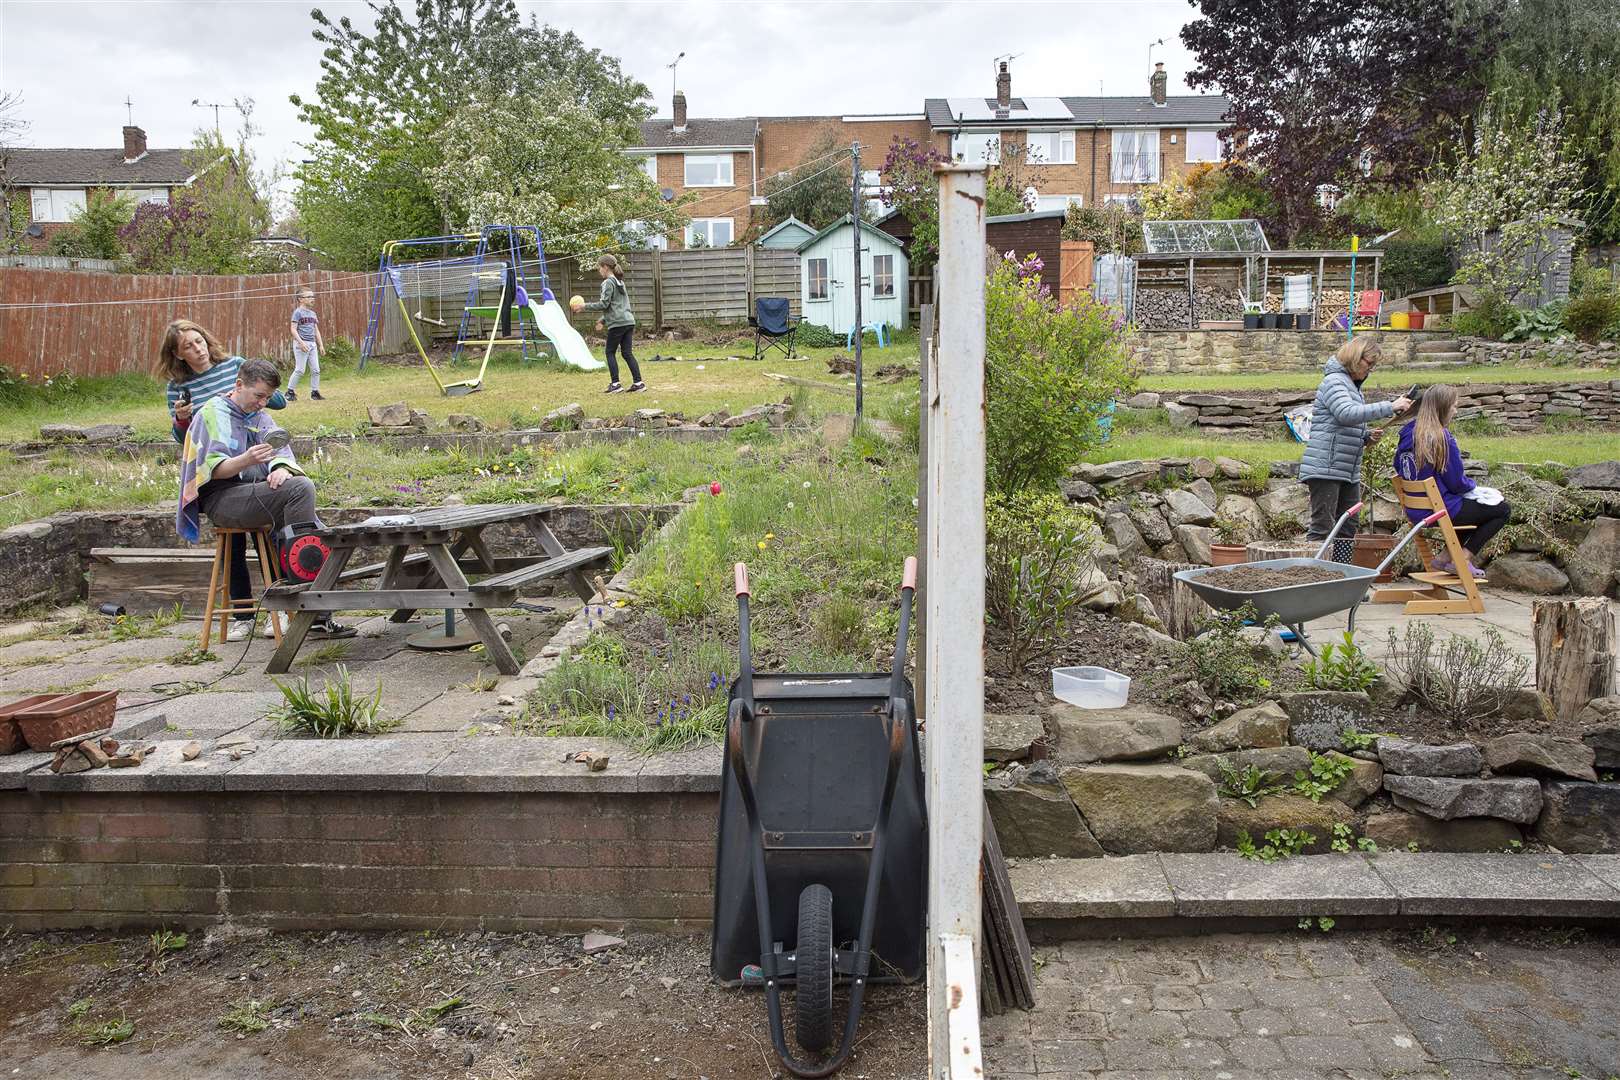 Neighbours in adjacent gardens on Hallamshire Drive, Sheffield, giving haircuts, taken by Historic England photographer Alun Bull (Alun Bull/Historic England/PA)